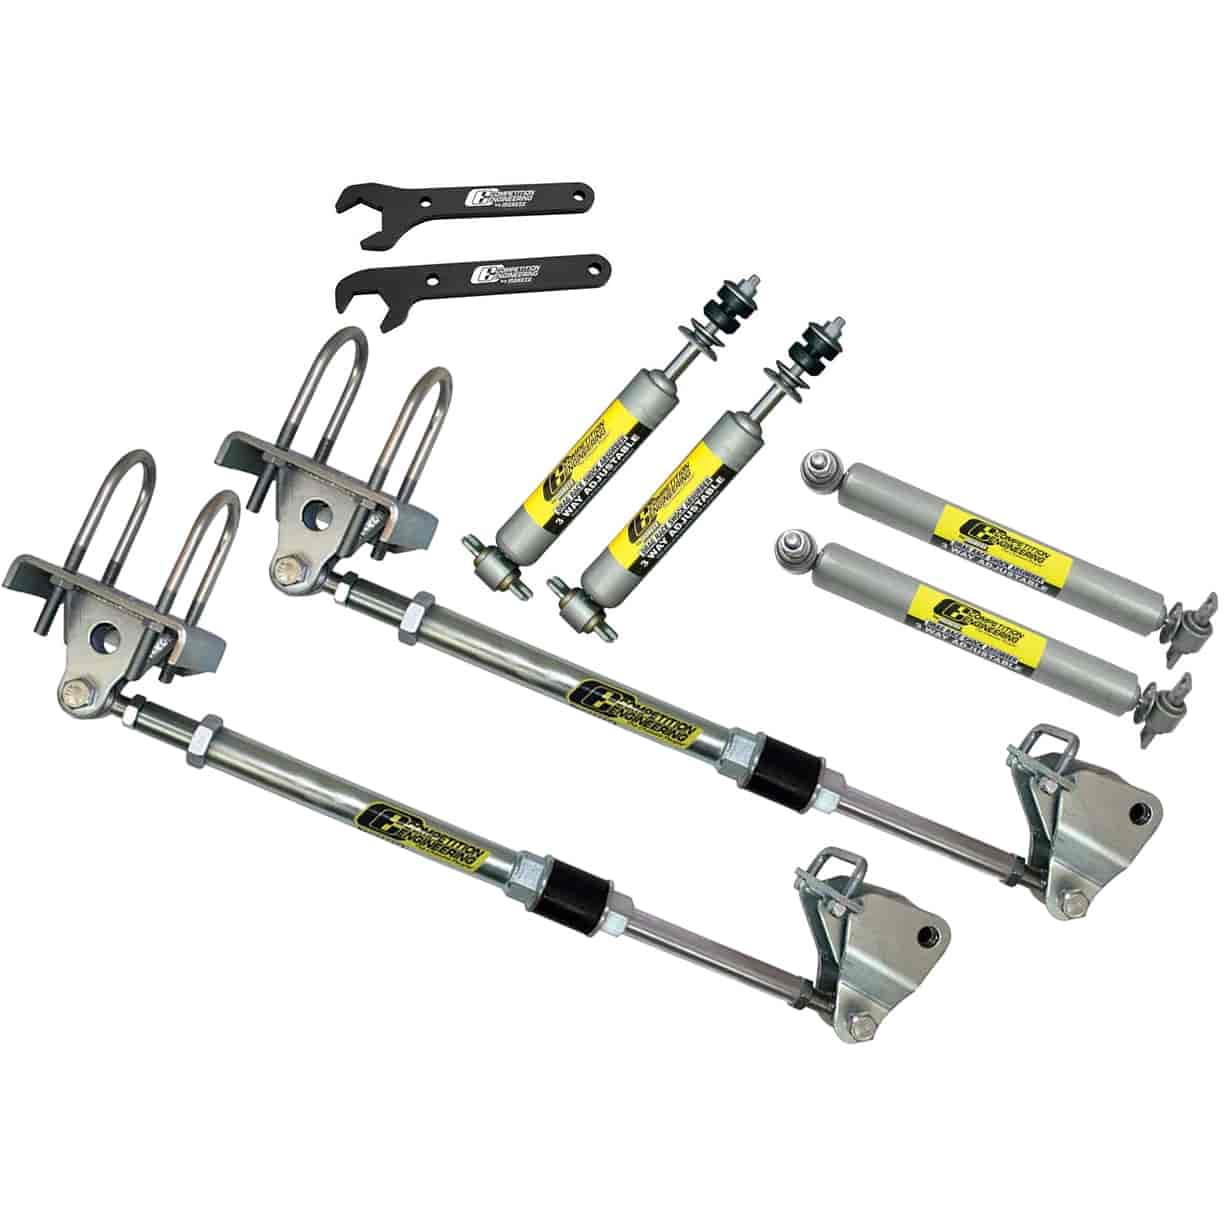 Slide-A-Link Suspension Kit 1981-2000 Chevy S10/GMC Sonoma Includes: